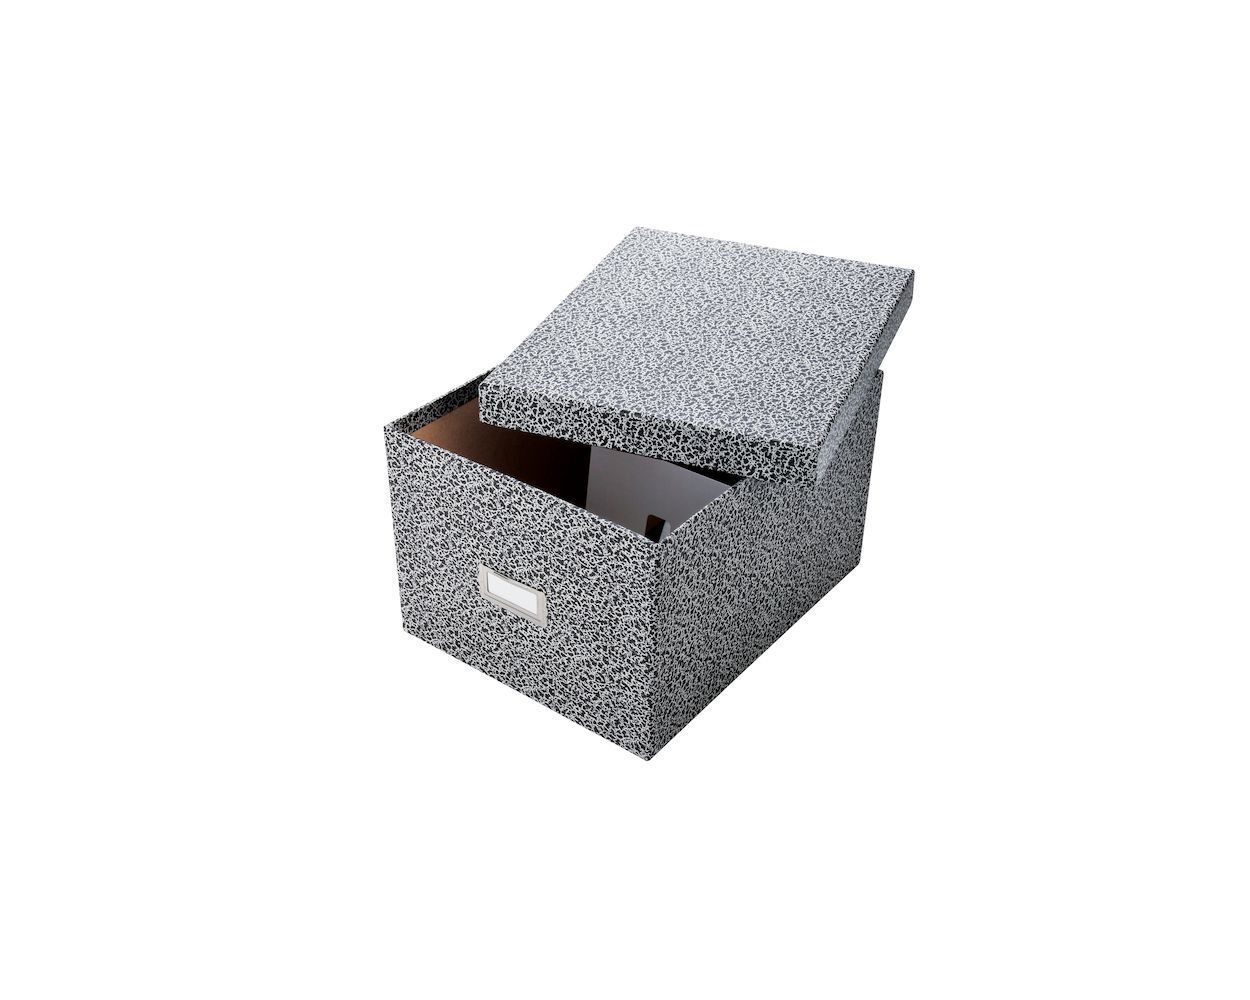 Wholesale Oxford Index Card Storage Boxes OXF40591 Discount Price